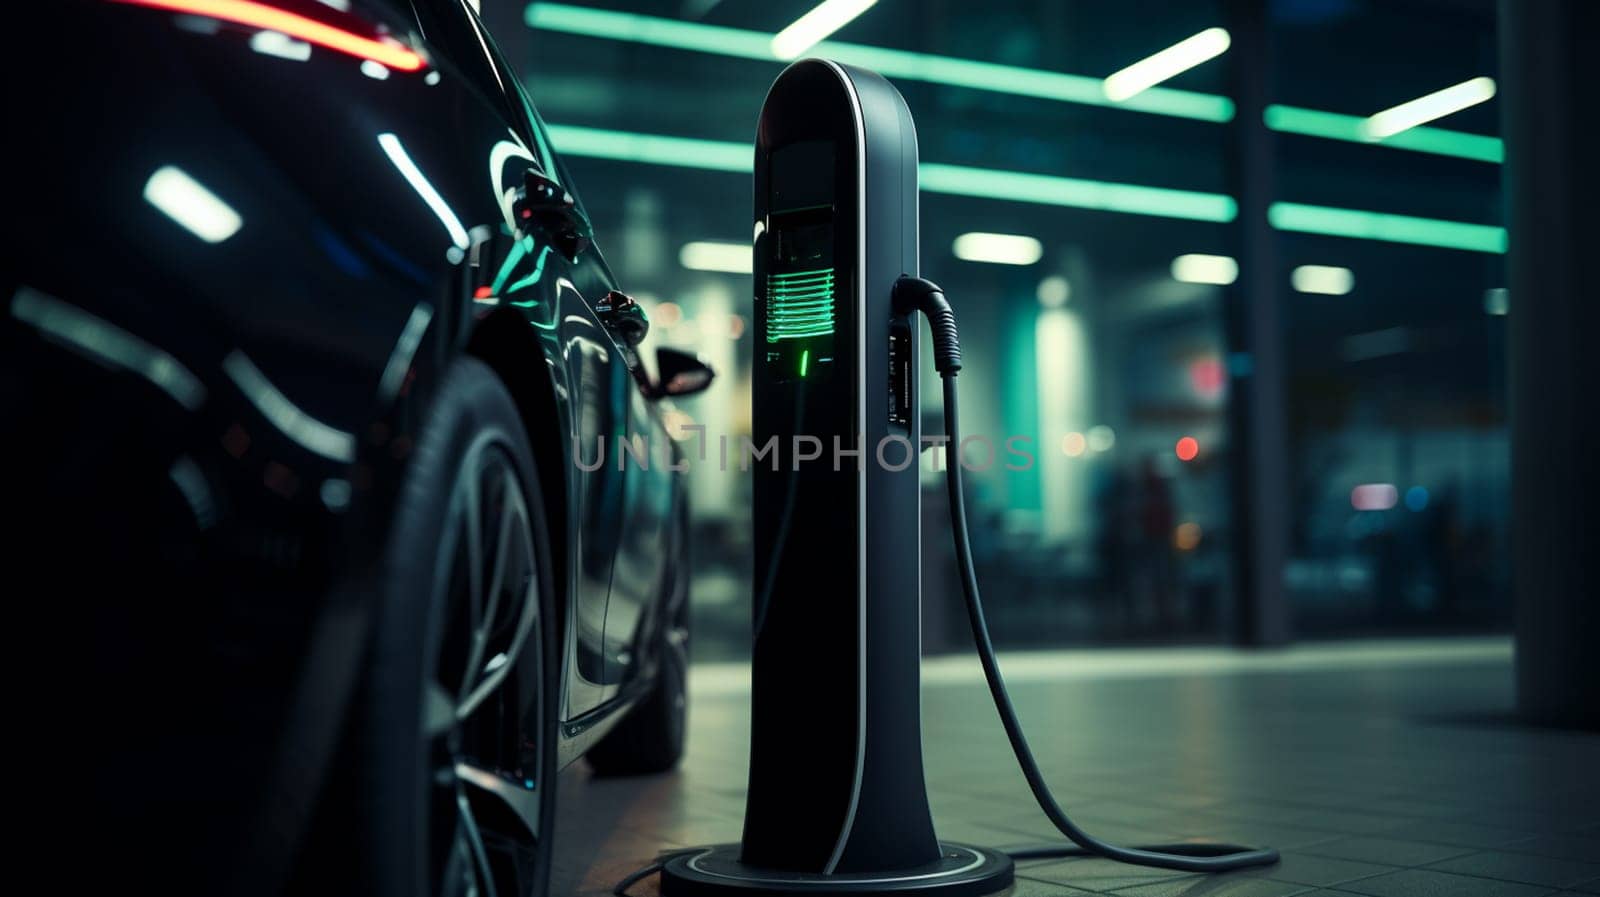 Charging an electric car, Future of transportation by Andelov13